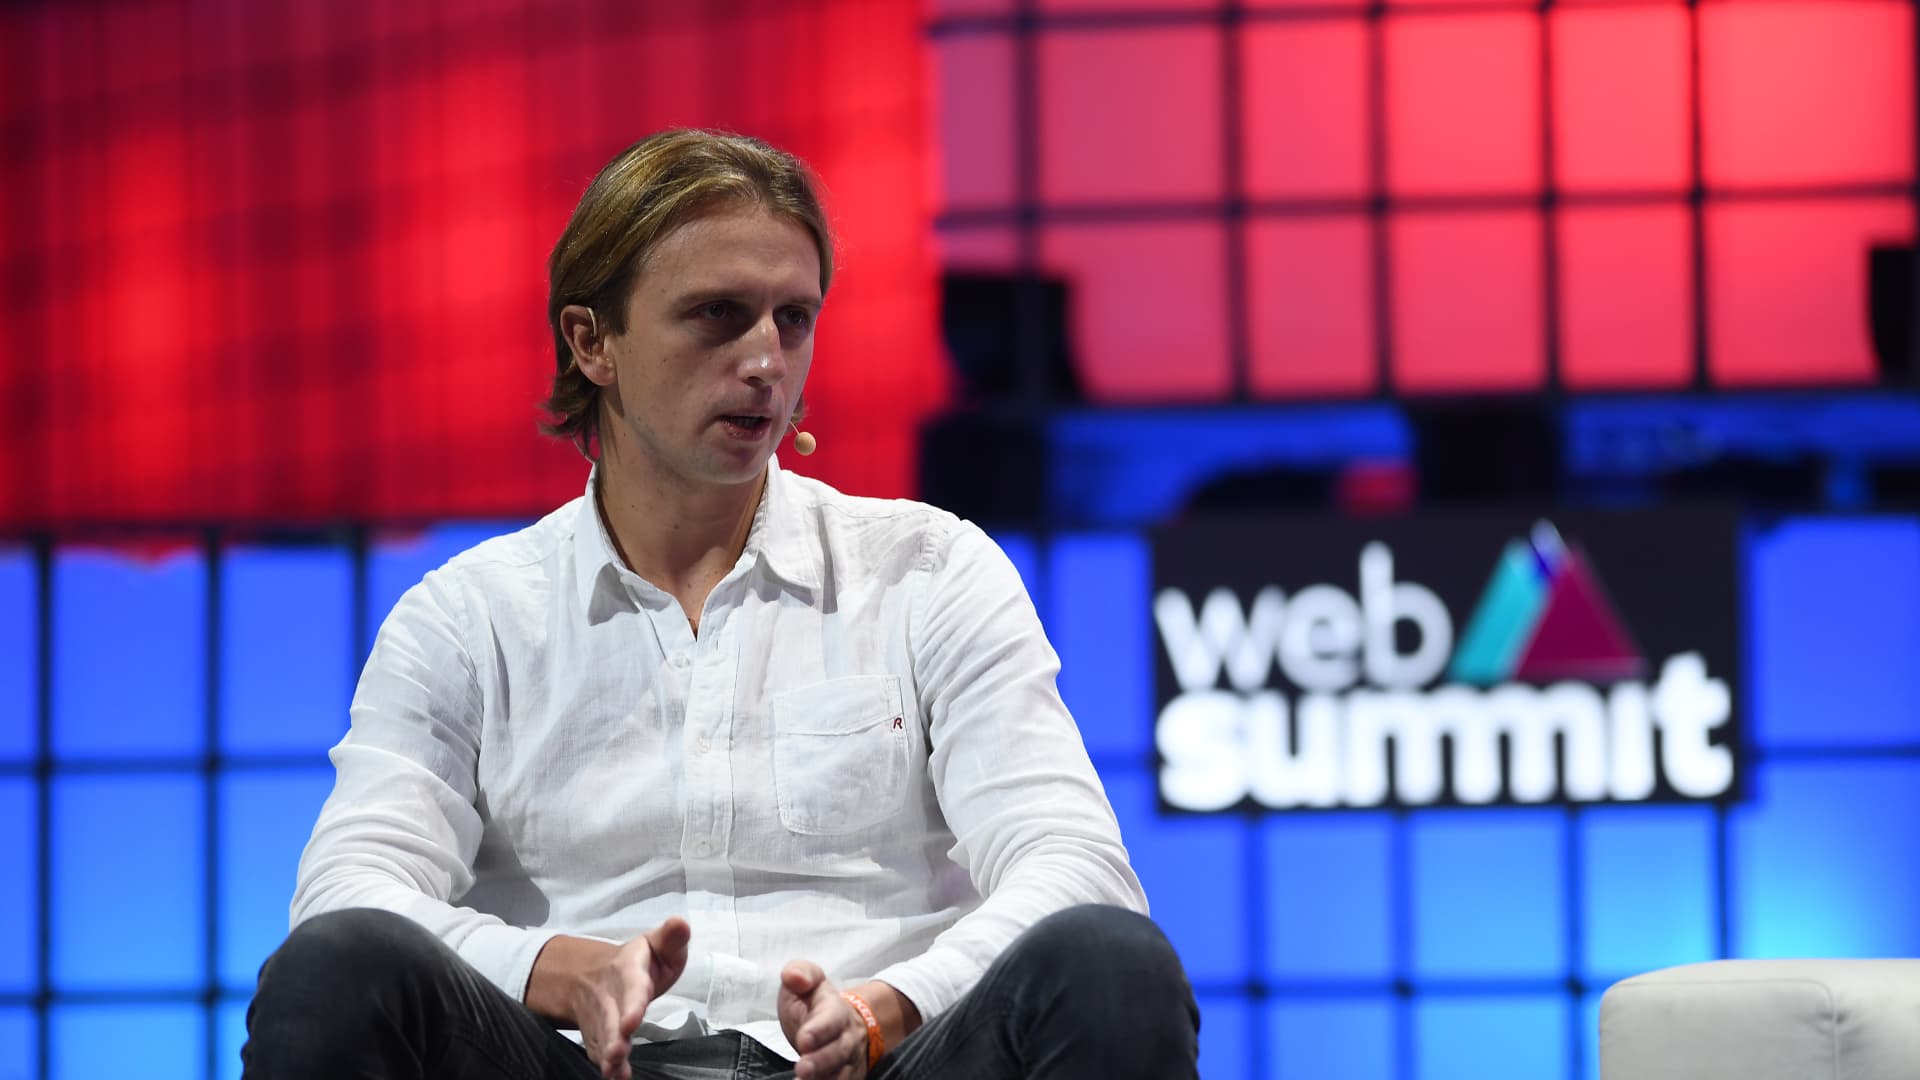 Revolut boss confident on UK bank license approval after record profit